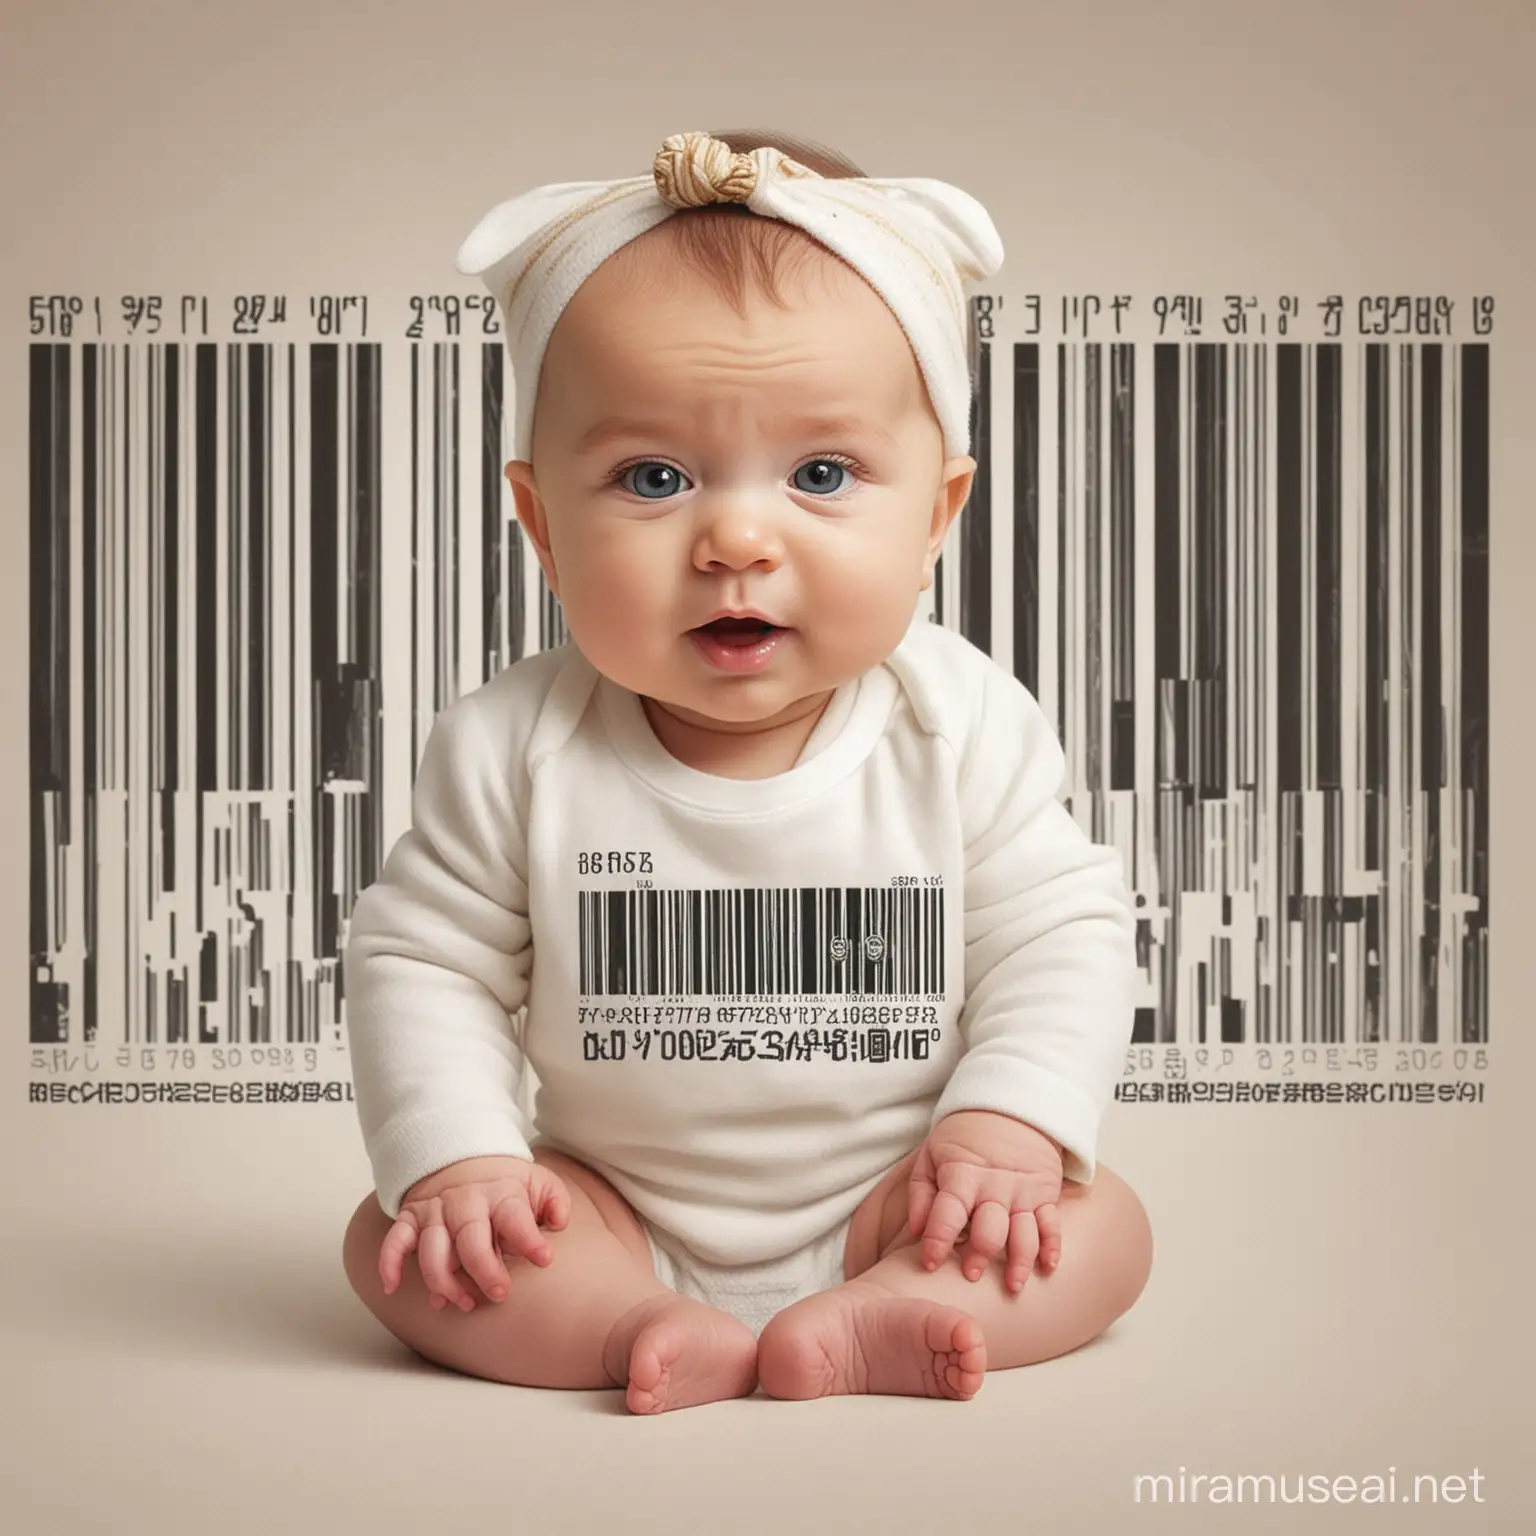 Futuristic Concept Designer Baby with Barcode Imprint